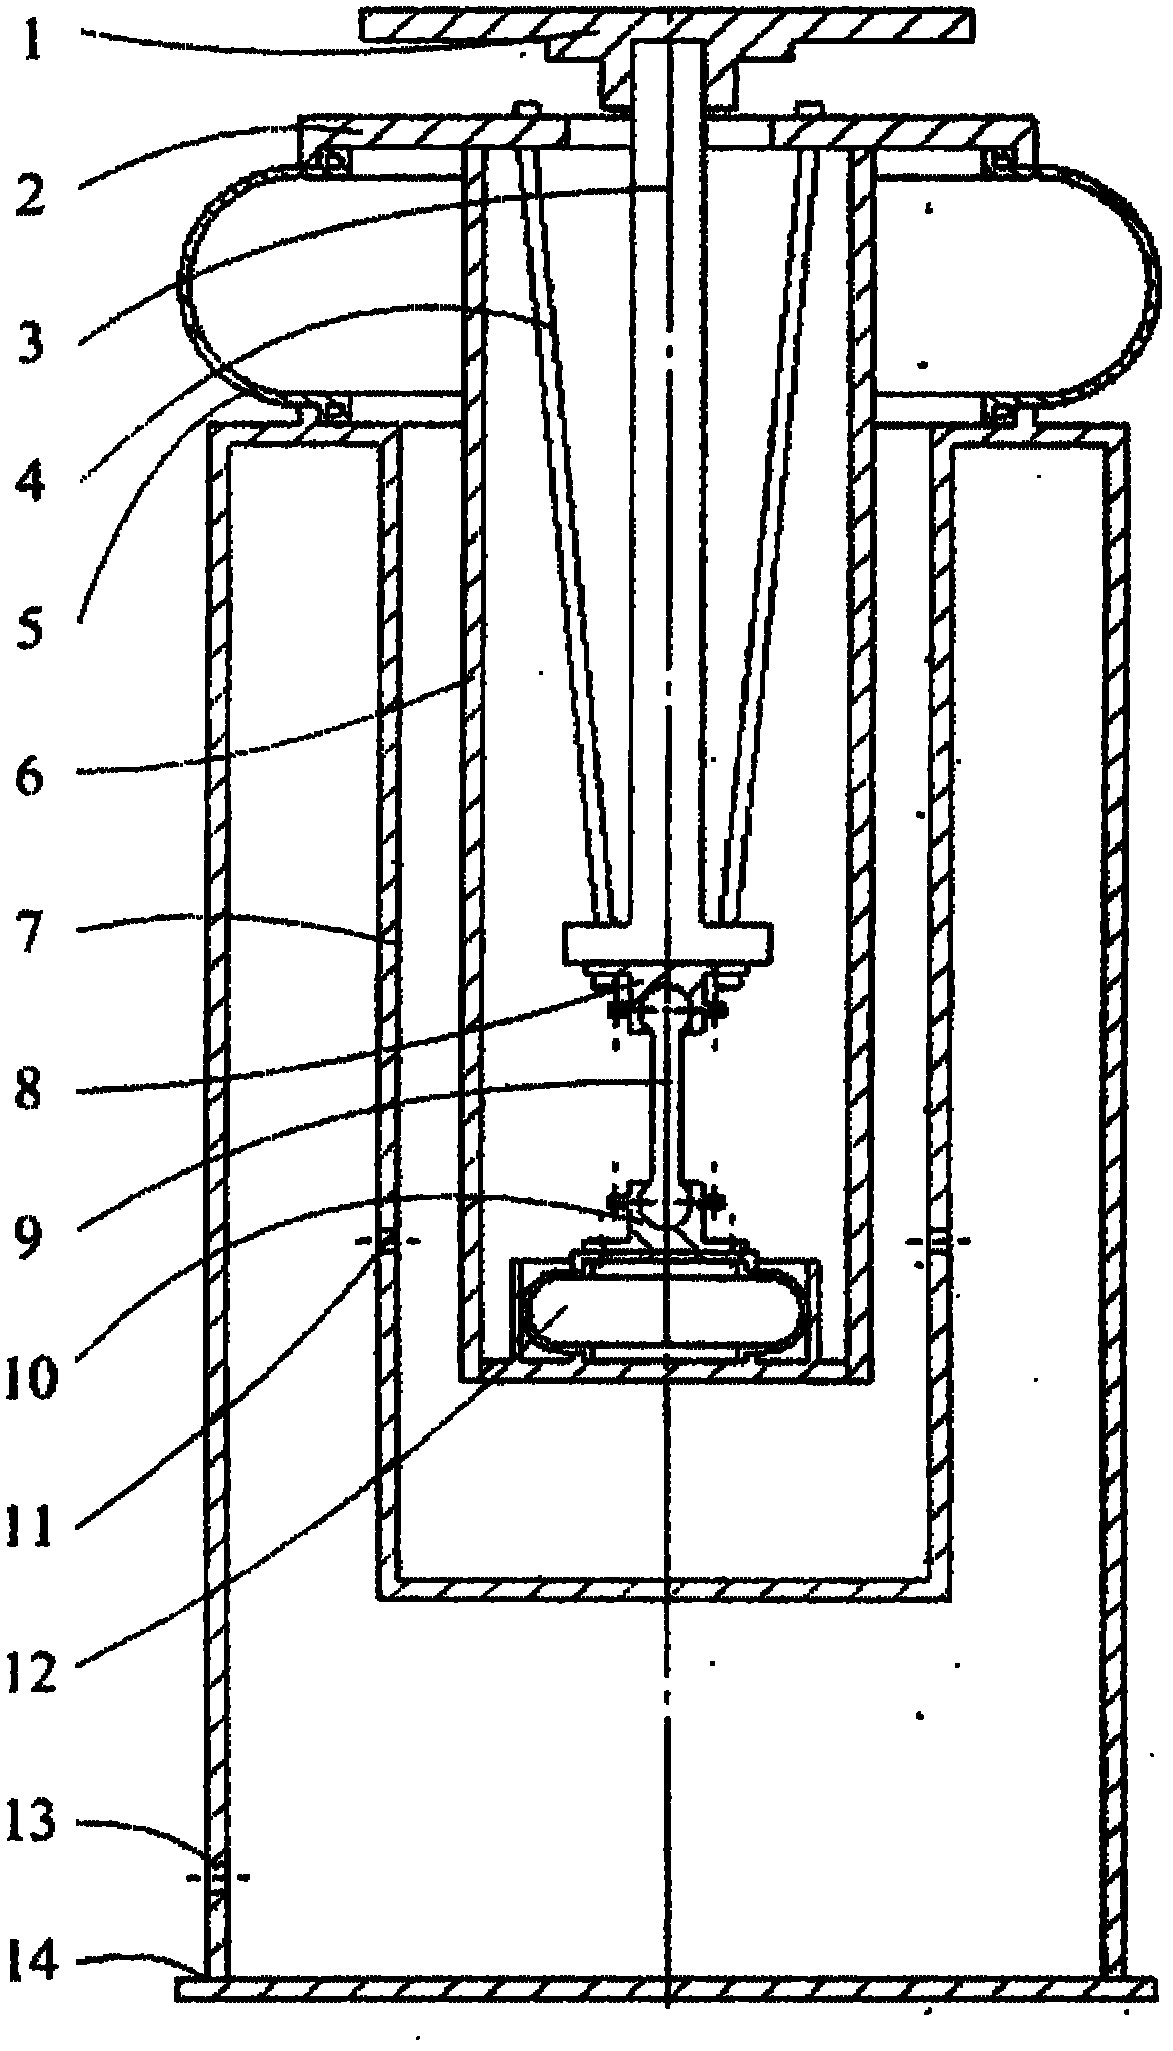 Pneumatic spring vibration isolator of air flotation type forward and backward swing concatenation mechanism based on ball head connecting rod